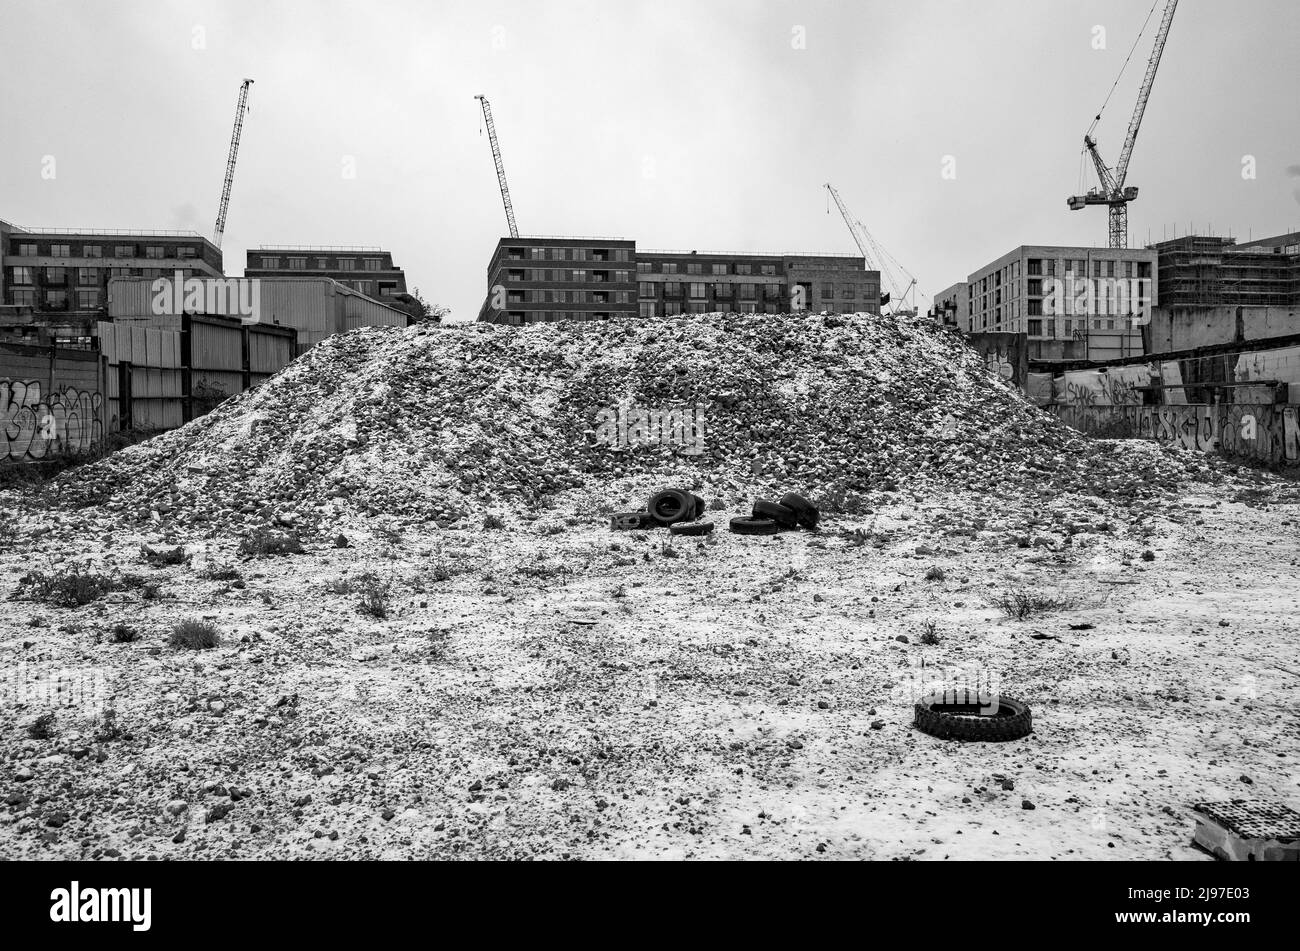 Snow in wasteland area, Hackney Wick, East London. Soon to be reclaimed for housing development. Stock Photo